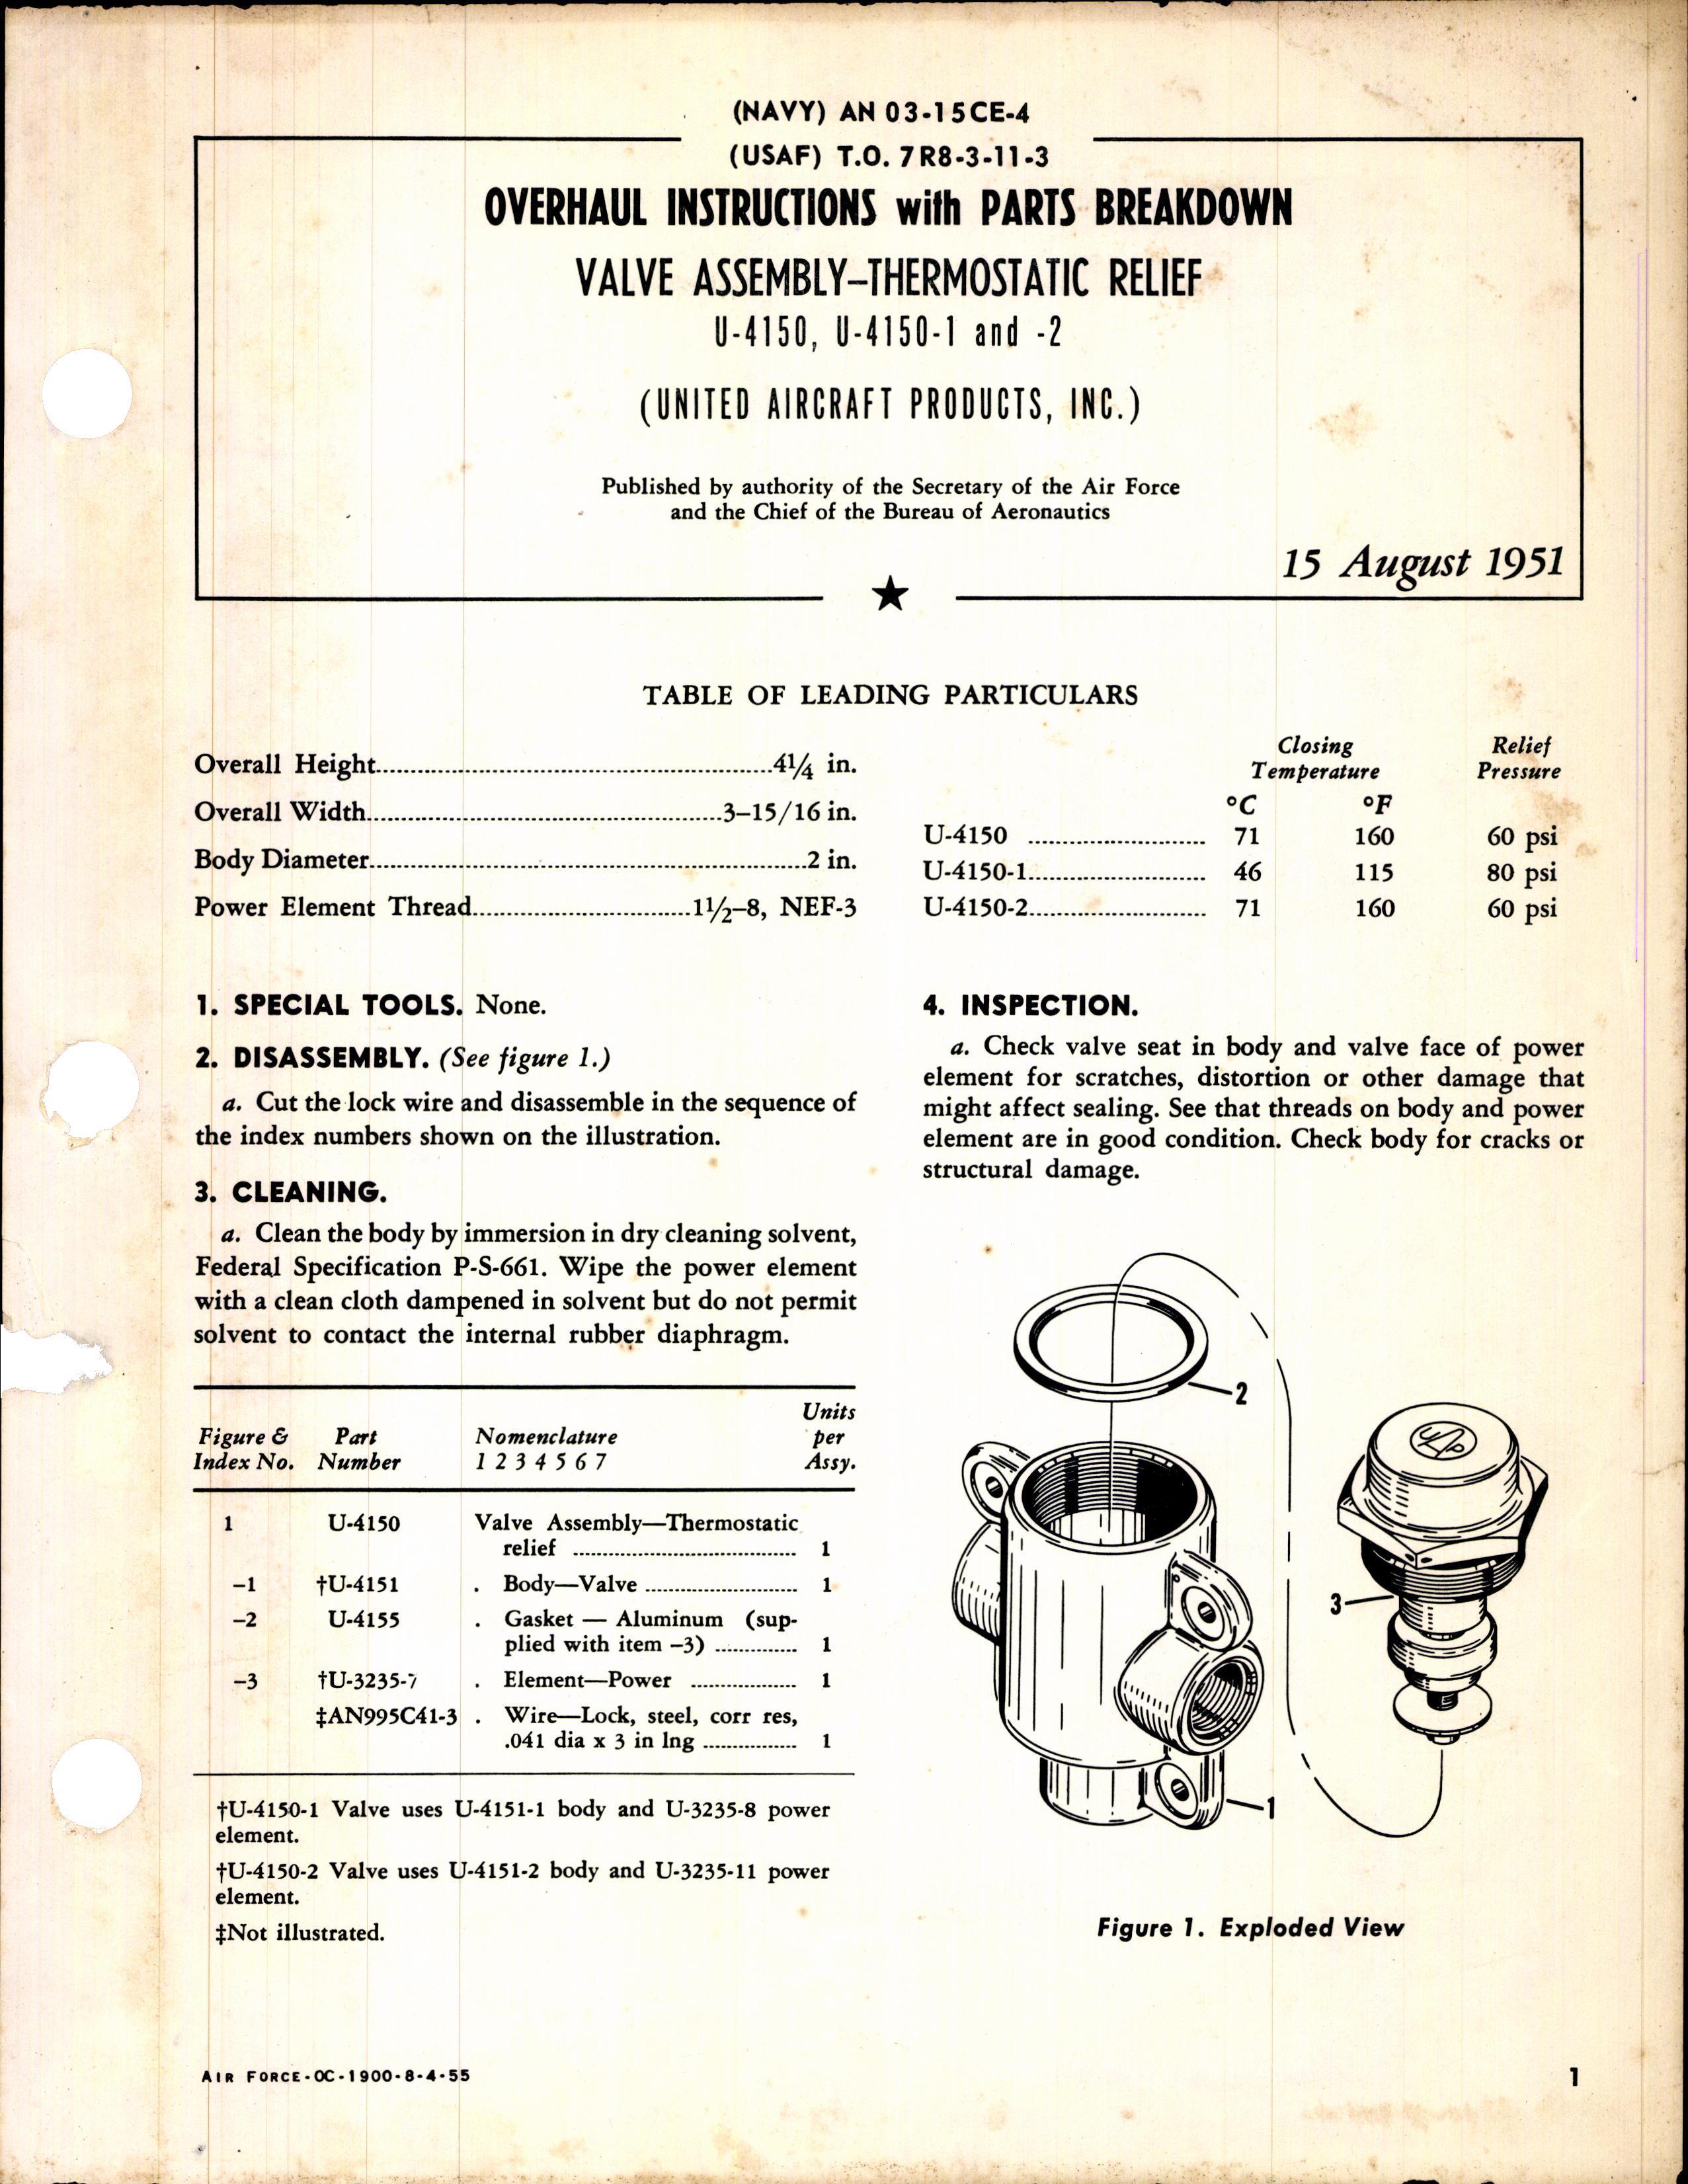 Sample page 1 from AirCorps Library document: Overhaul Instructions with Parts Breakdown for Valve Assembly - Thermostatic Relief